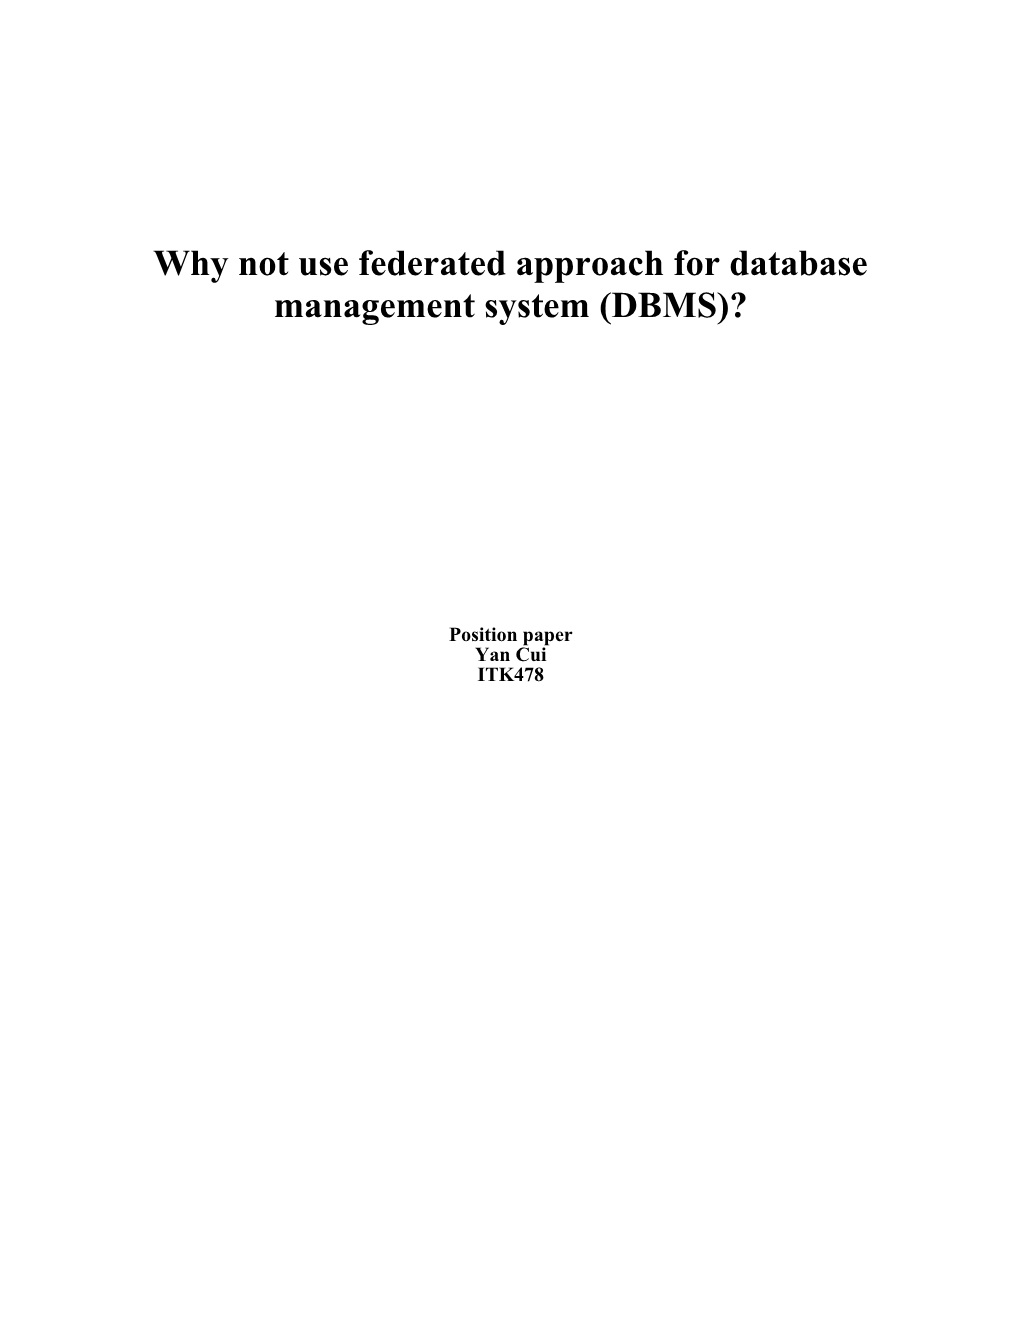 Why Not Use Federated Approach for Database Management System (DBMS)?